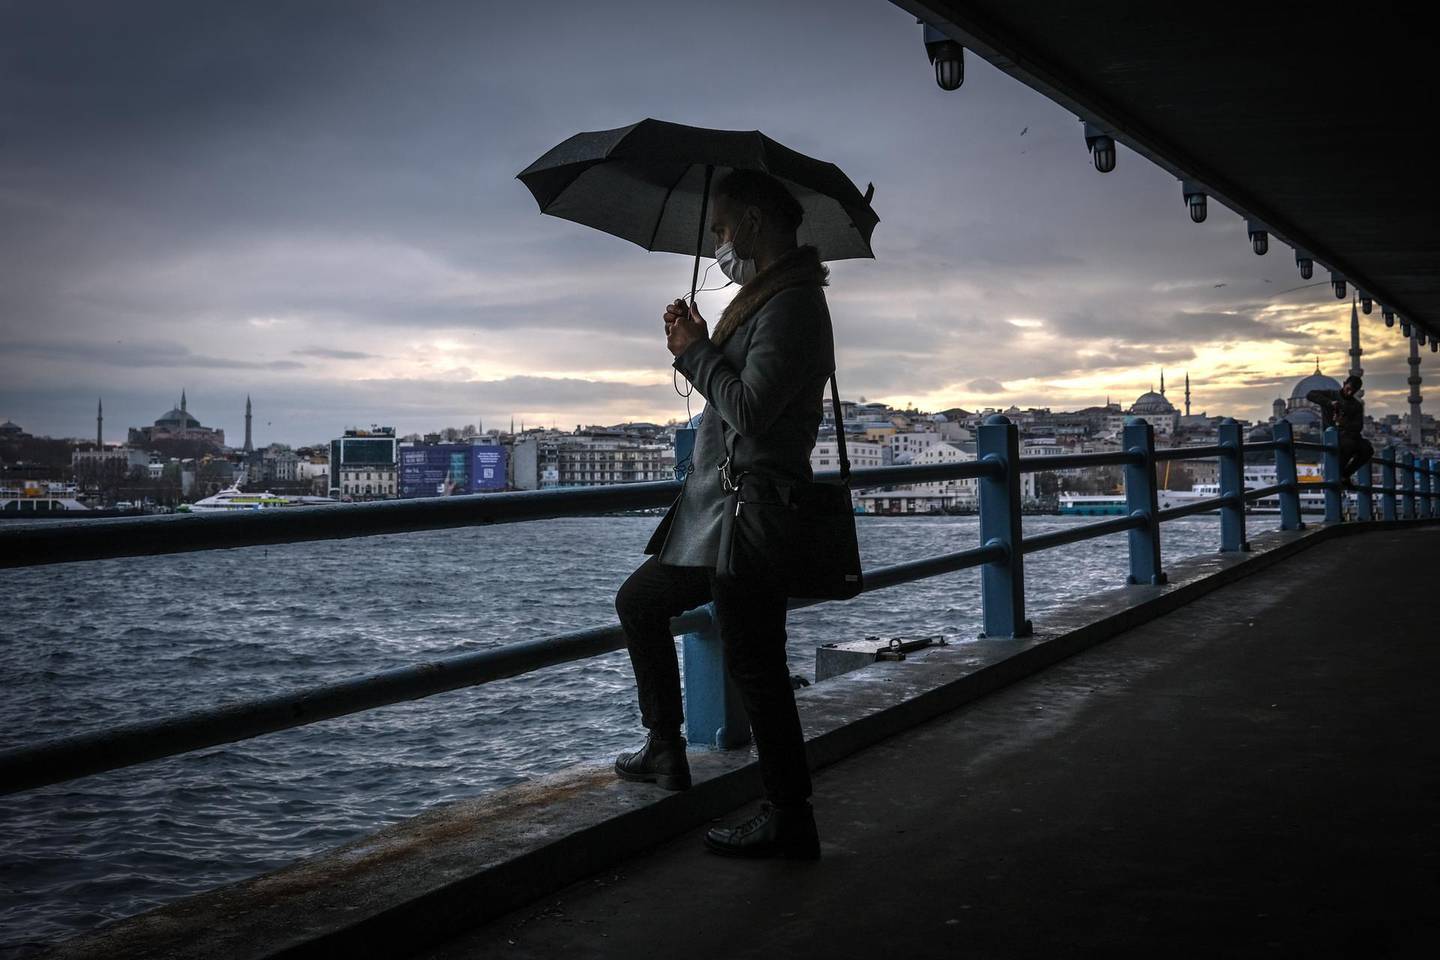 epa08910572 A man waits under the Galata Bridge with Hagia Sophia Mosque (L) and Yeni Mosque (R)  in the background on a rainy day, amid the ongoing coronavirus pandemic in Istanbul, Turkey, 28 December 2020. Turkey imposed curfews on weekdays after 9pm and full weekend lockdowns with the exception of tourists to combat the spread of coronavirus, after a recent spike in Covid-19 infections and related deaths.  EPA/SEDAT SUNA